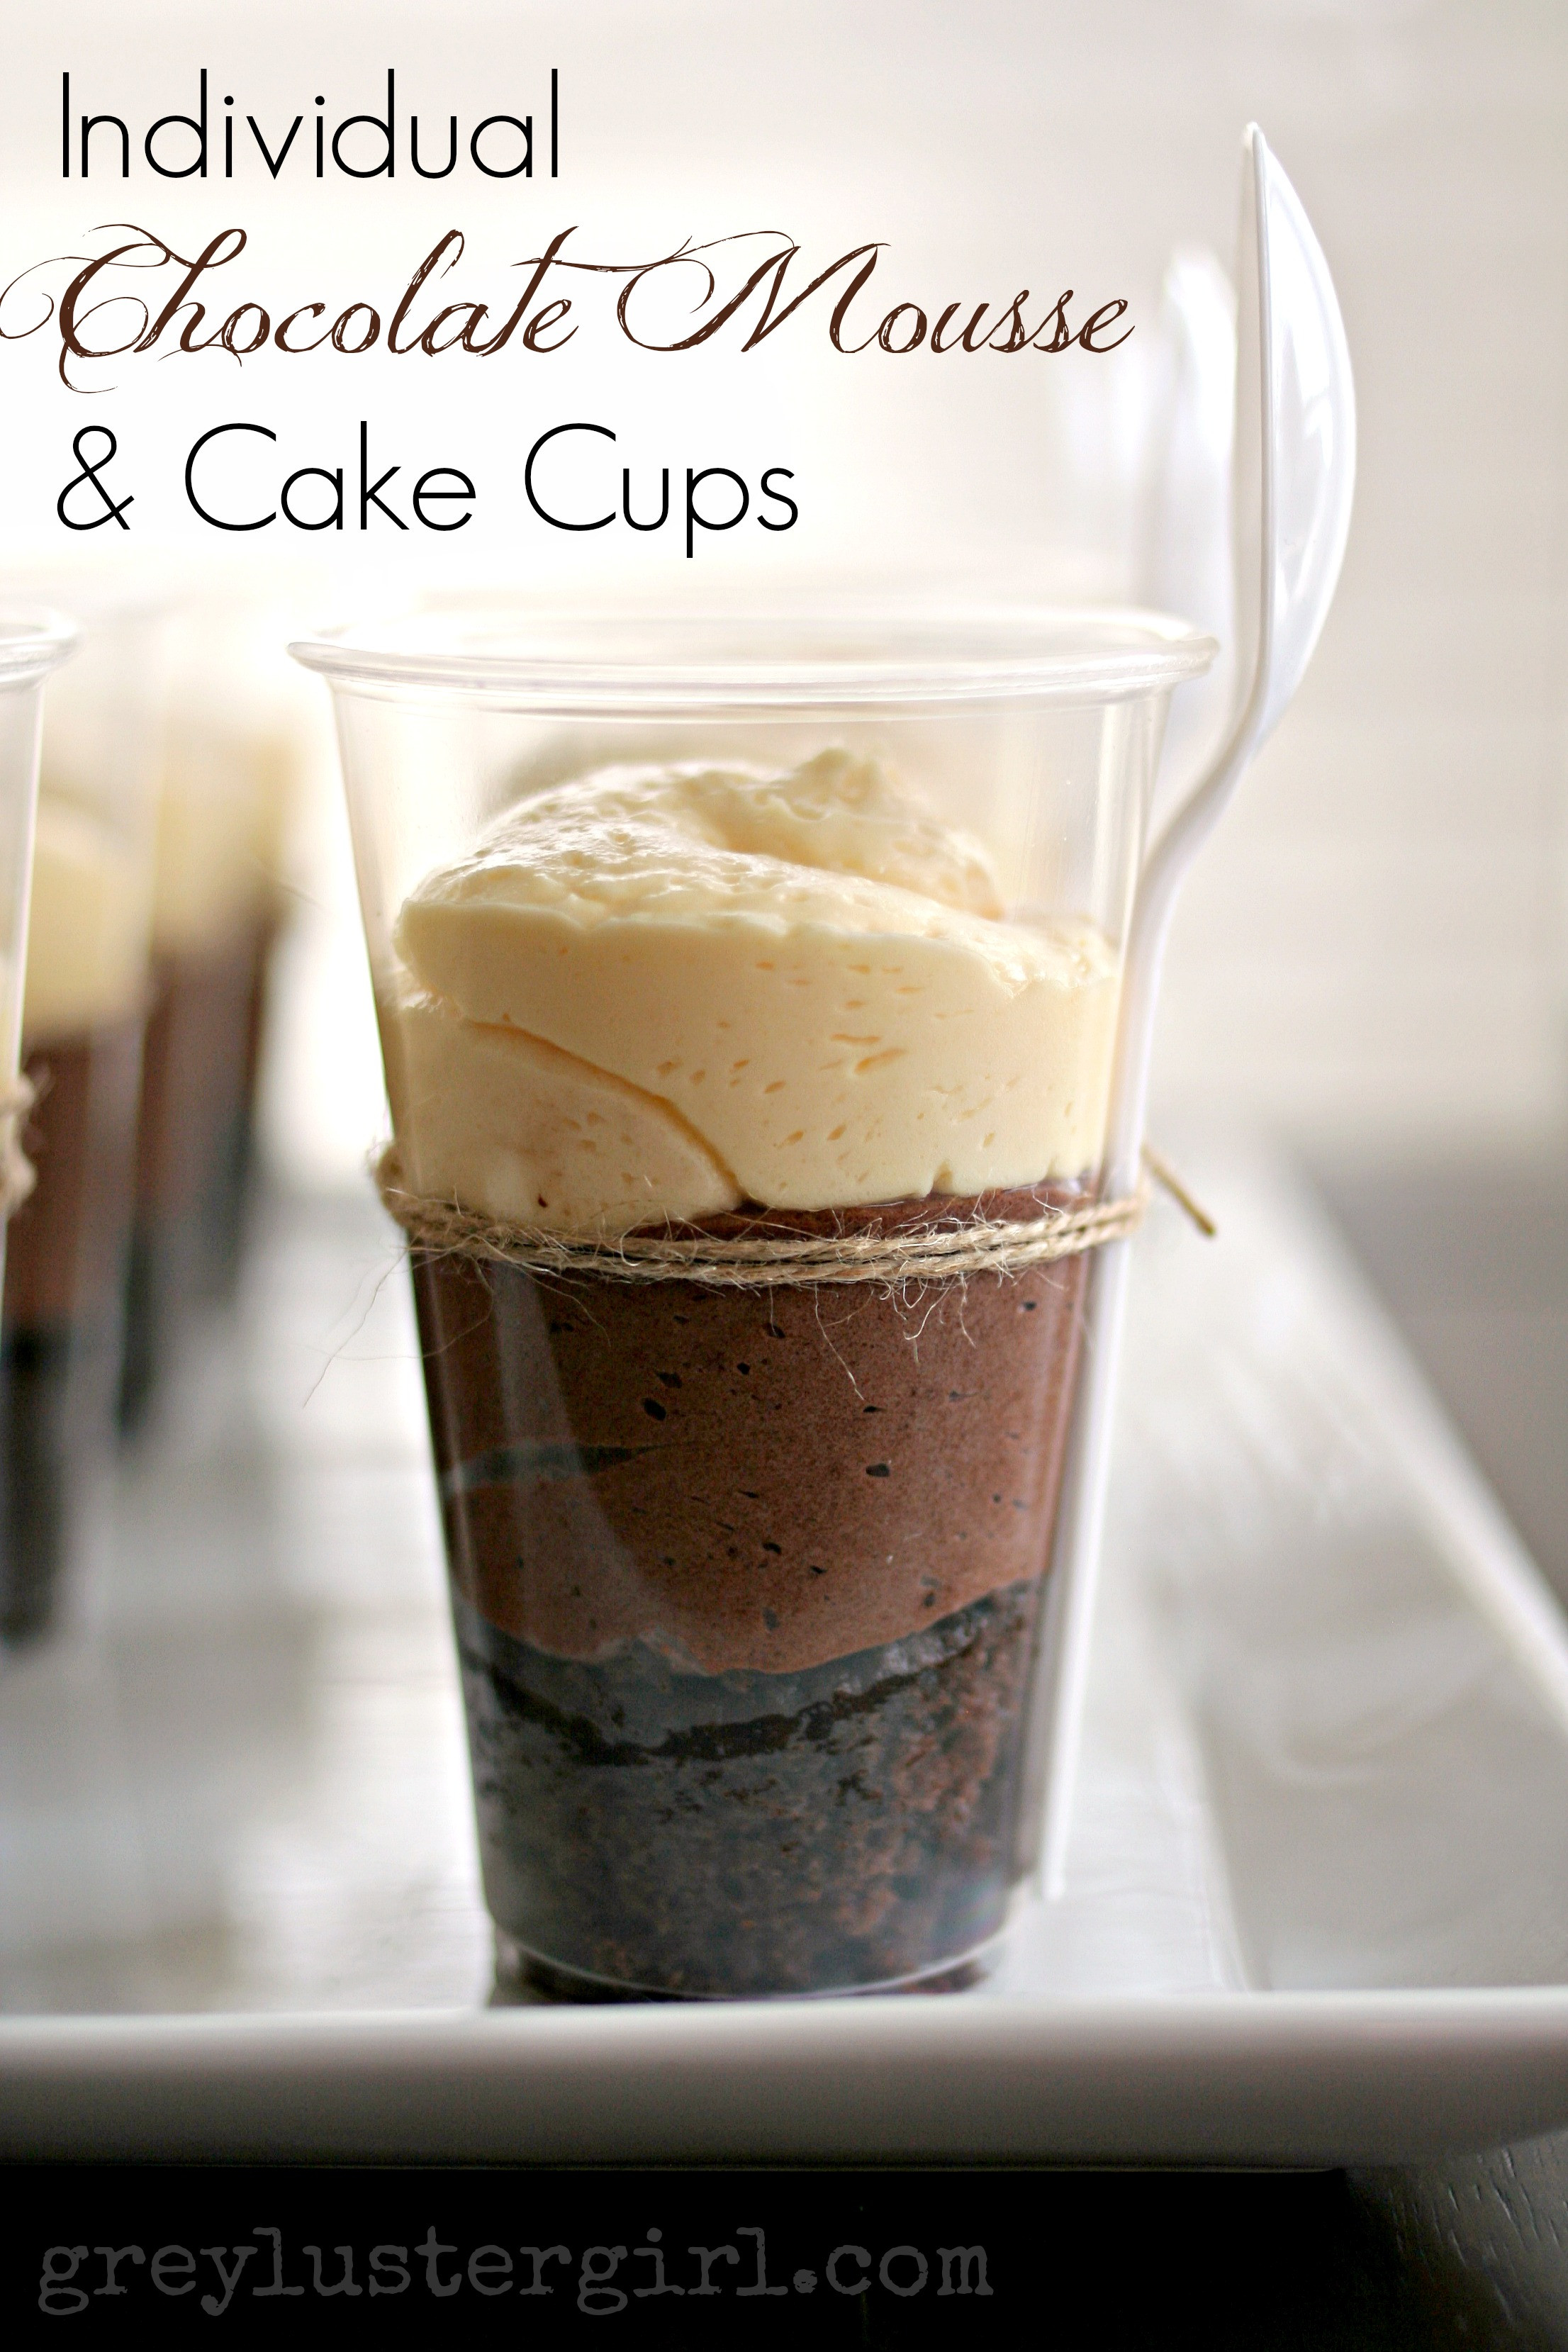 Chocolate Cake In A Cup
 Individual Chocolate Mousse & Cake Cups